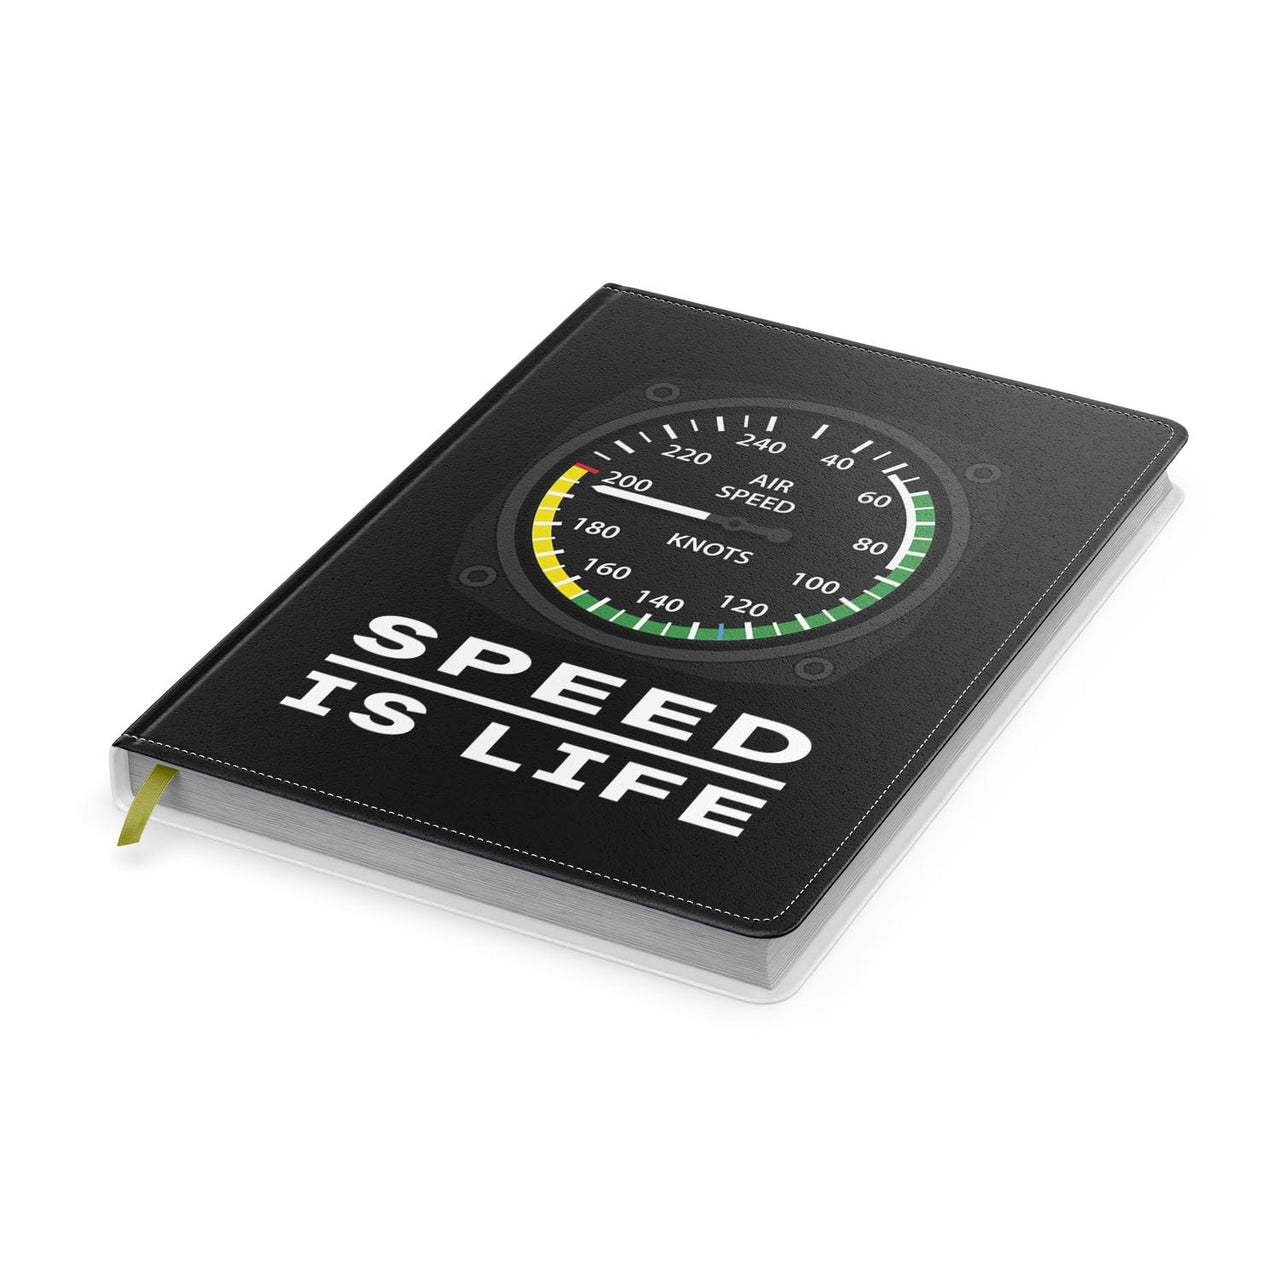 Speed Is Life Designed Notebooks